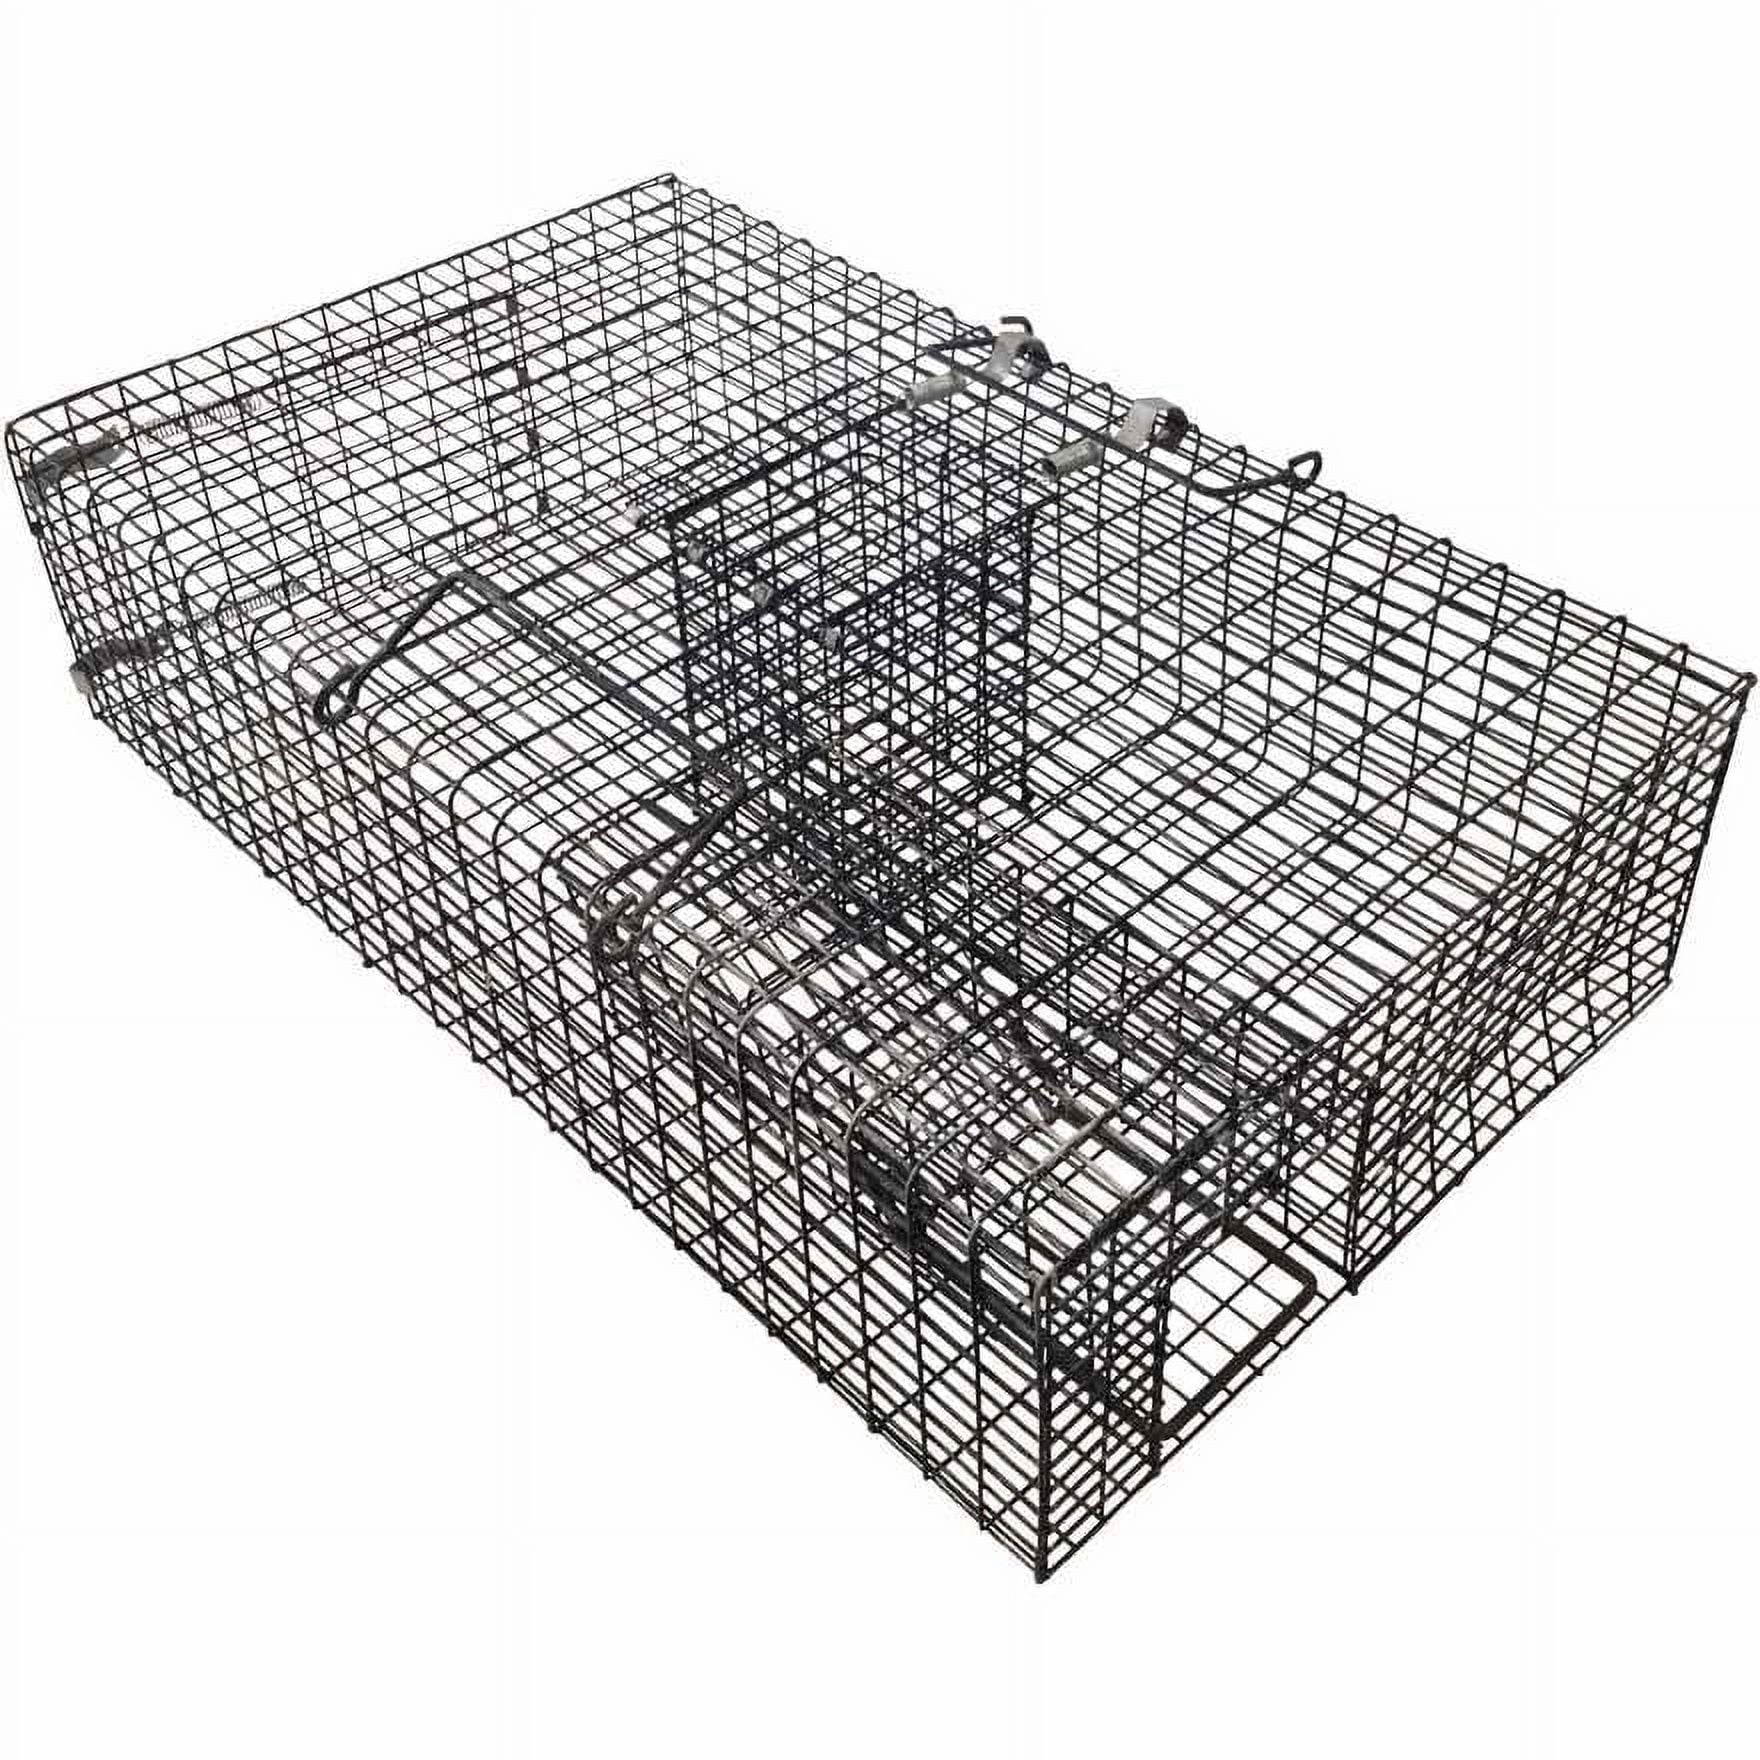 Mouse Killer Roll Trap, Rat Trap Bucket Spinner with 19.69in Mesh Ramp